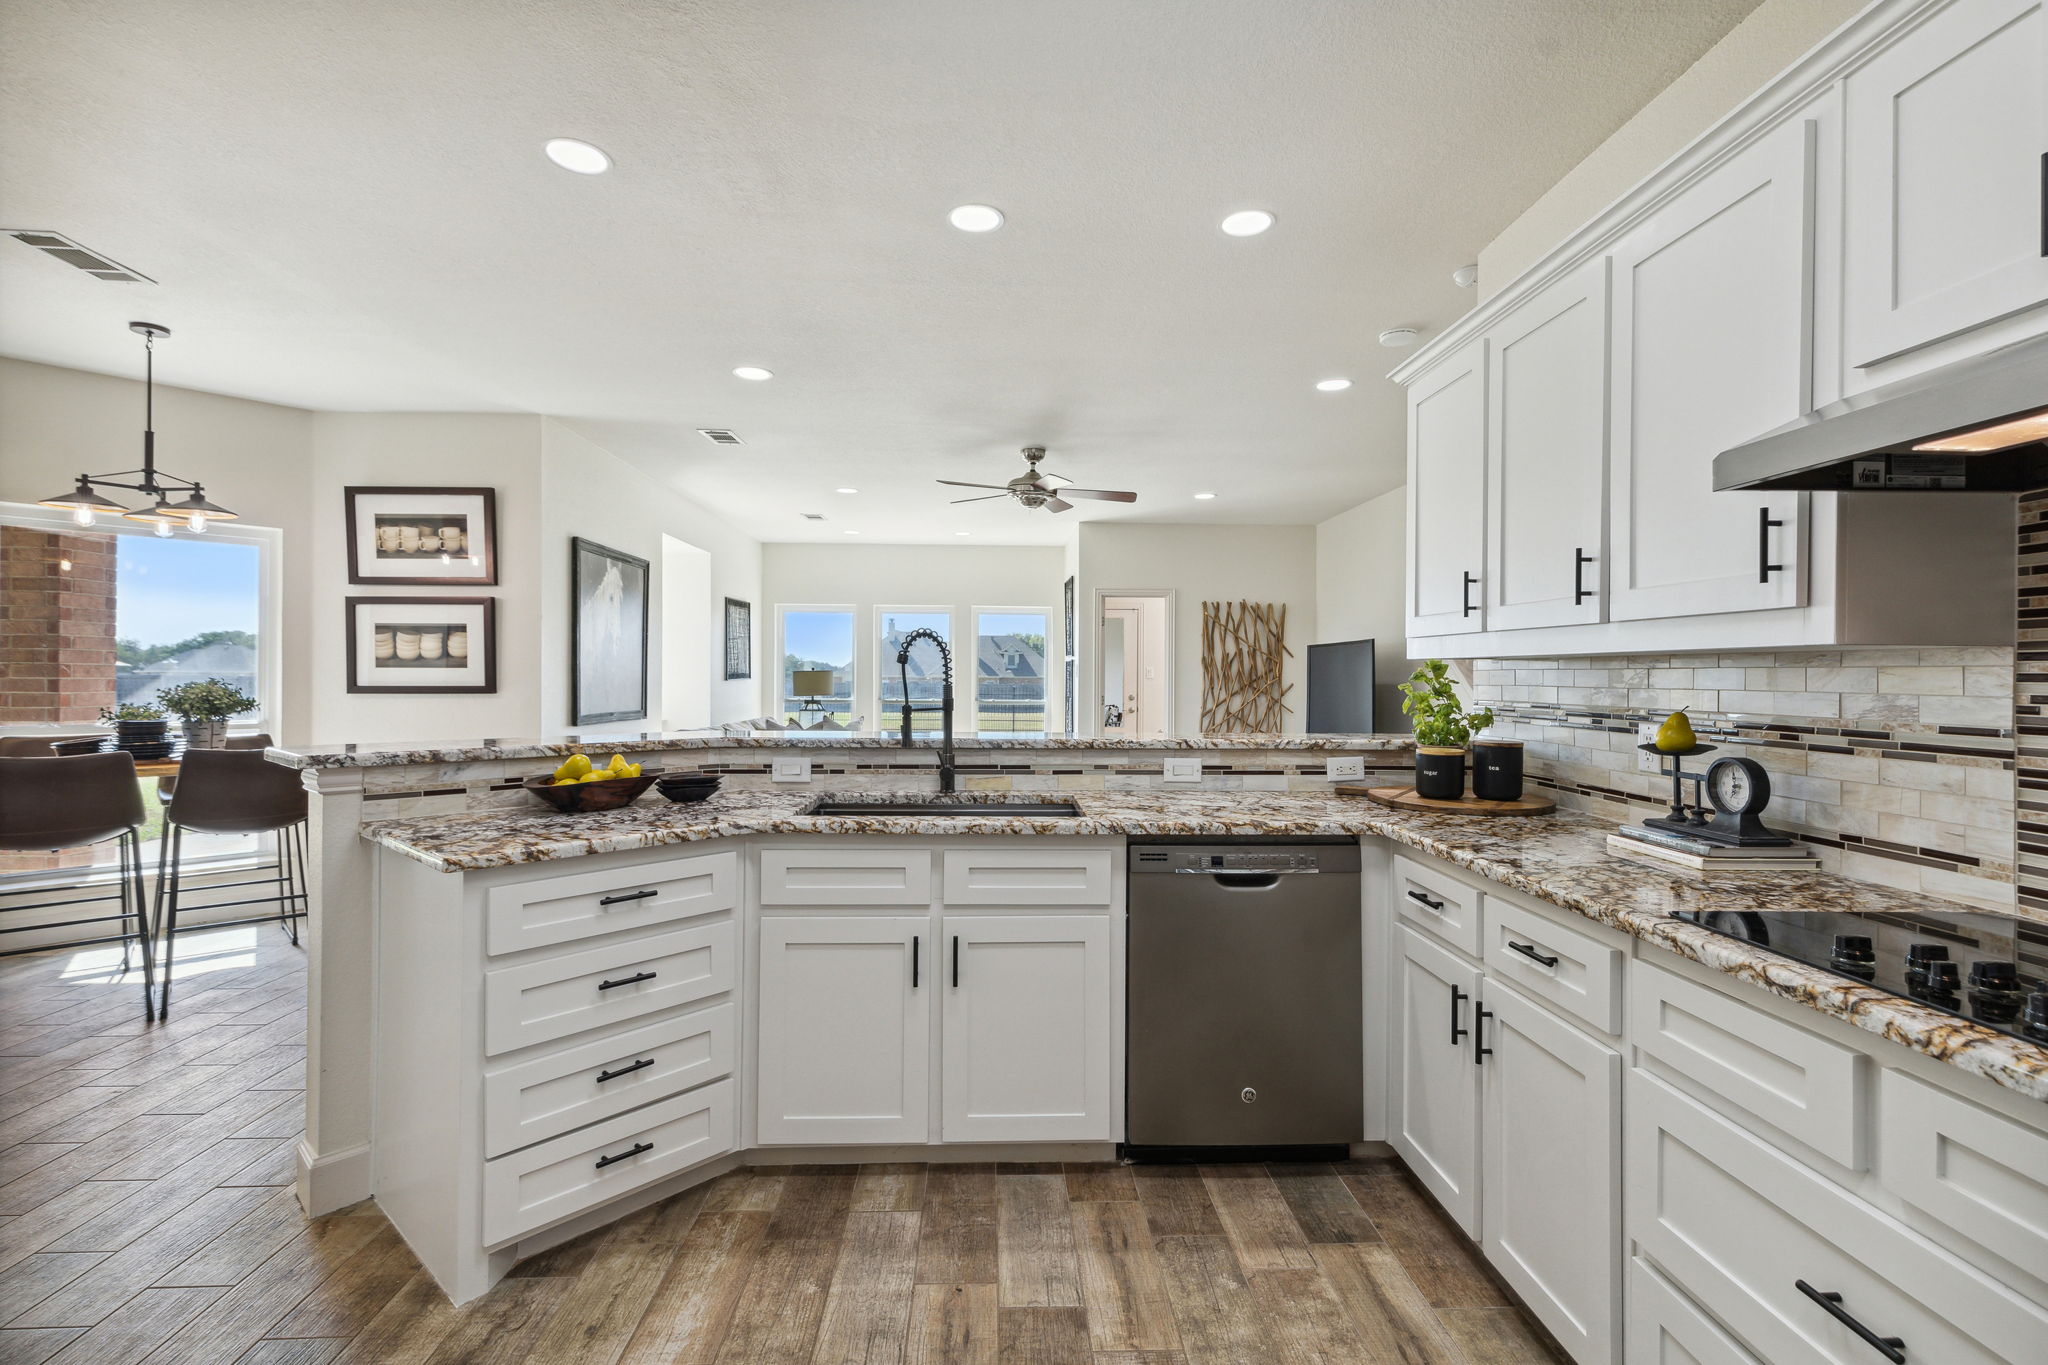 Did you See the Countertops & Back Splash?